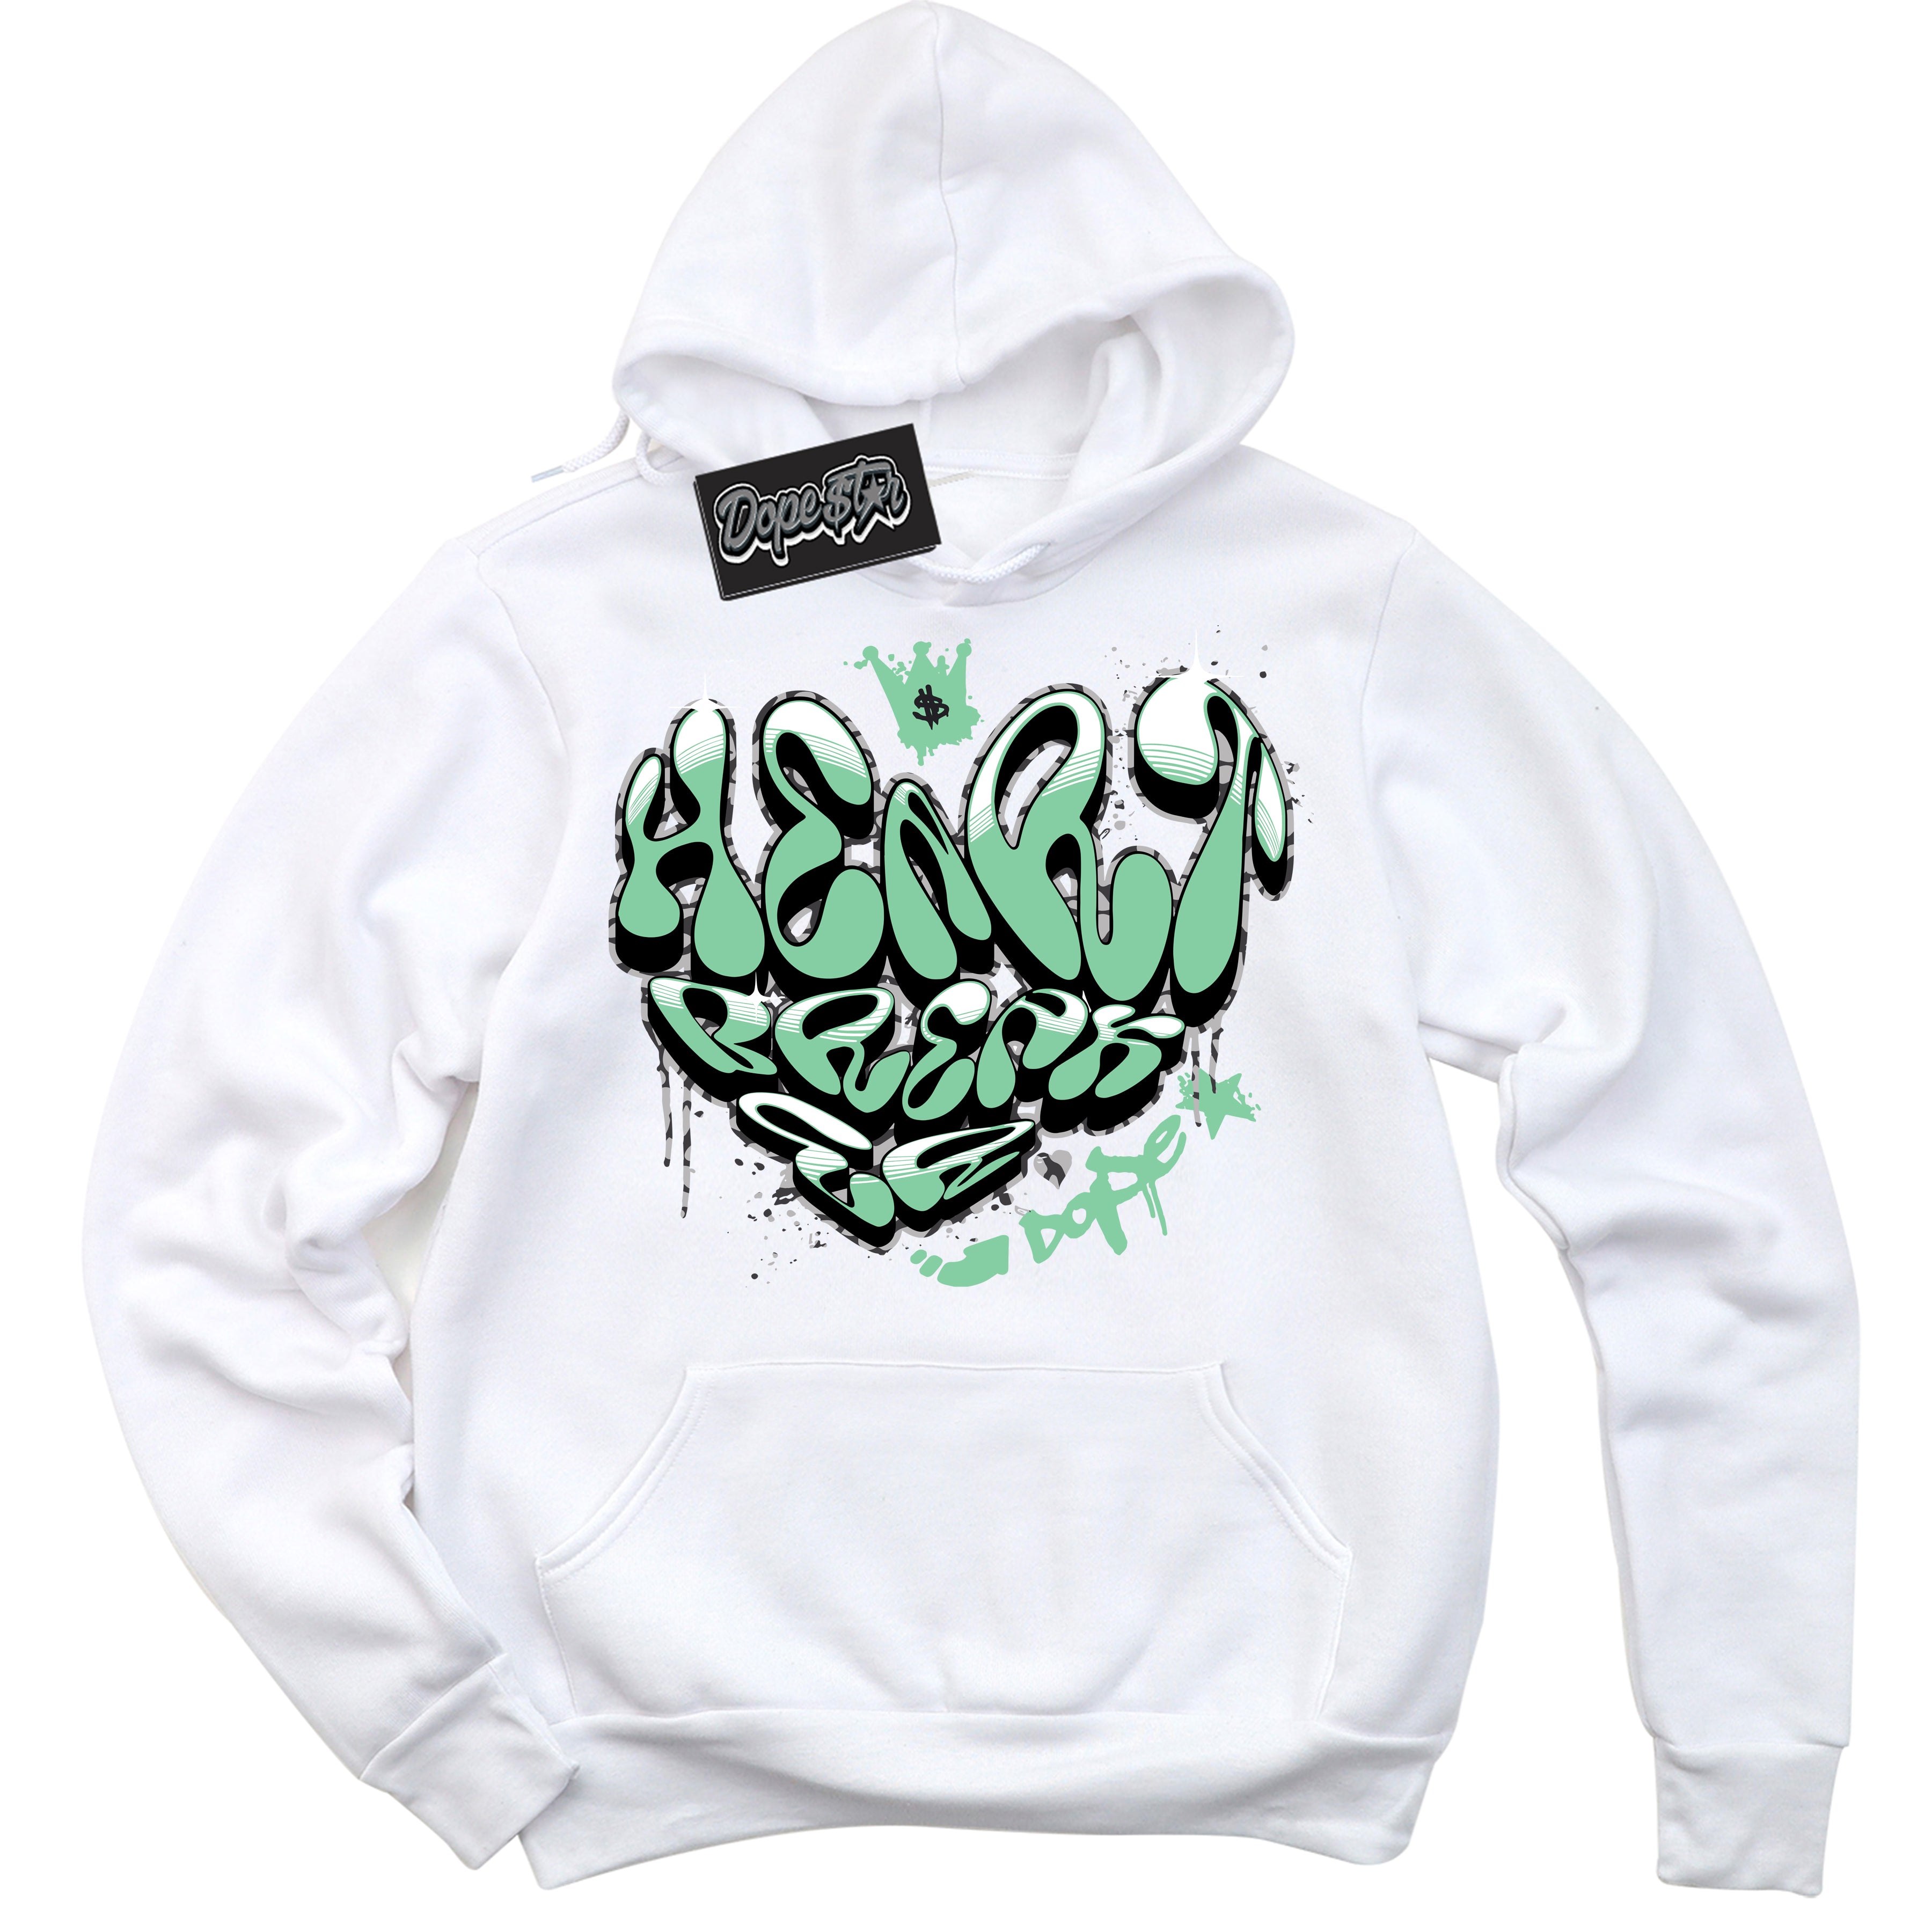 Cool White Graphic DopeStar Hoodie with “ Heartbreaker Graffiti “ print, that perfectly matches Green Glow 3s sneakers